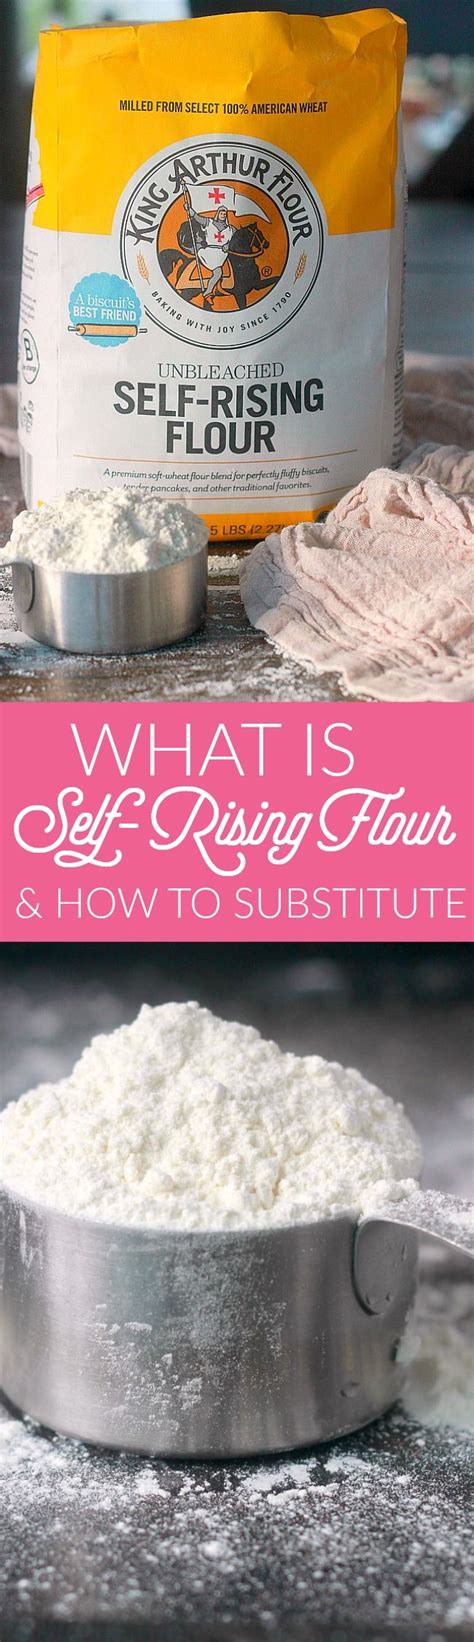 Self rising flour is simple to make at home. Self-Rising Flour Substitute | Recipe | Self rising flour, Food substitutions, Baking basics